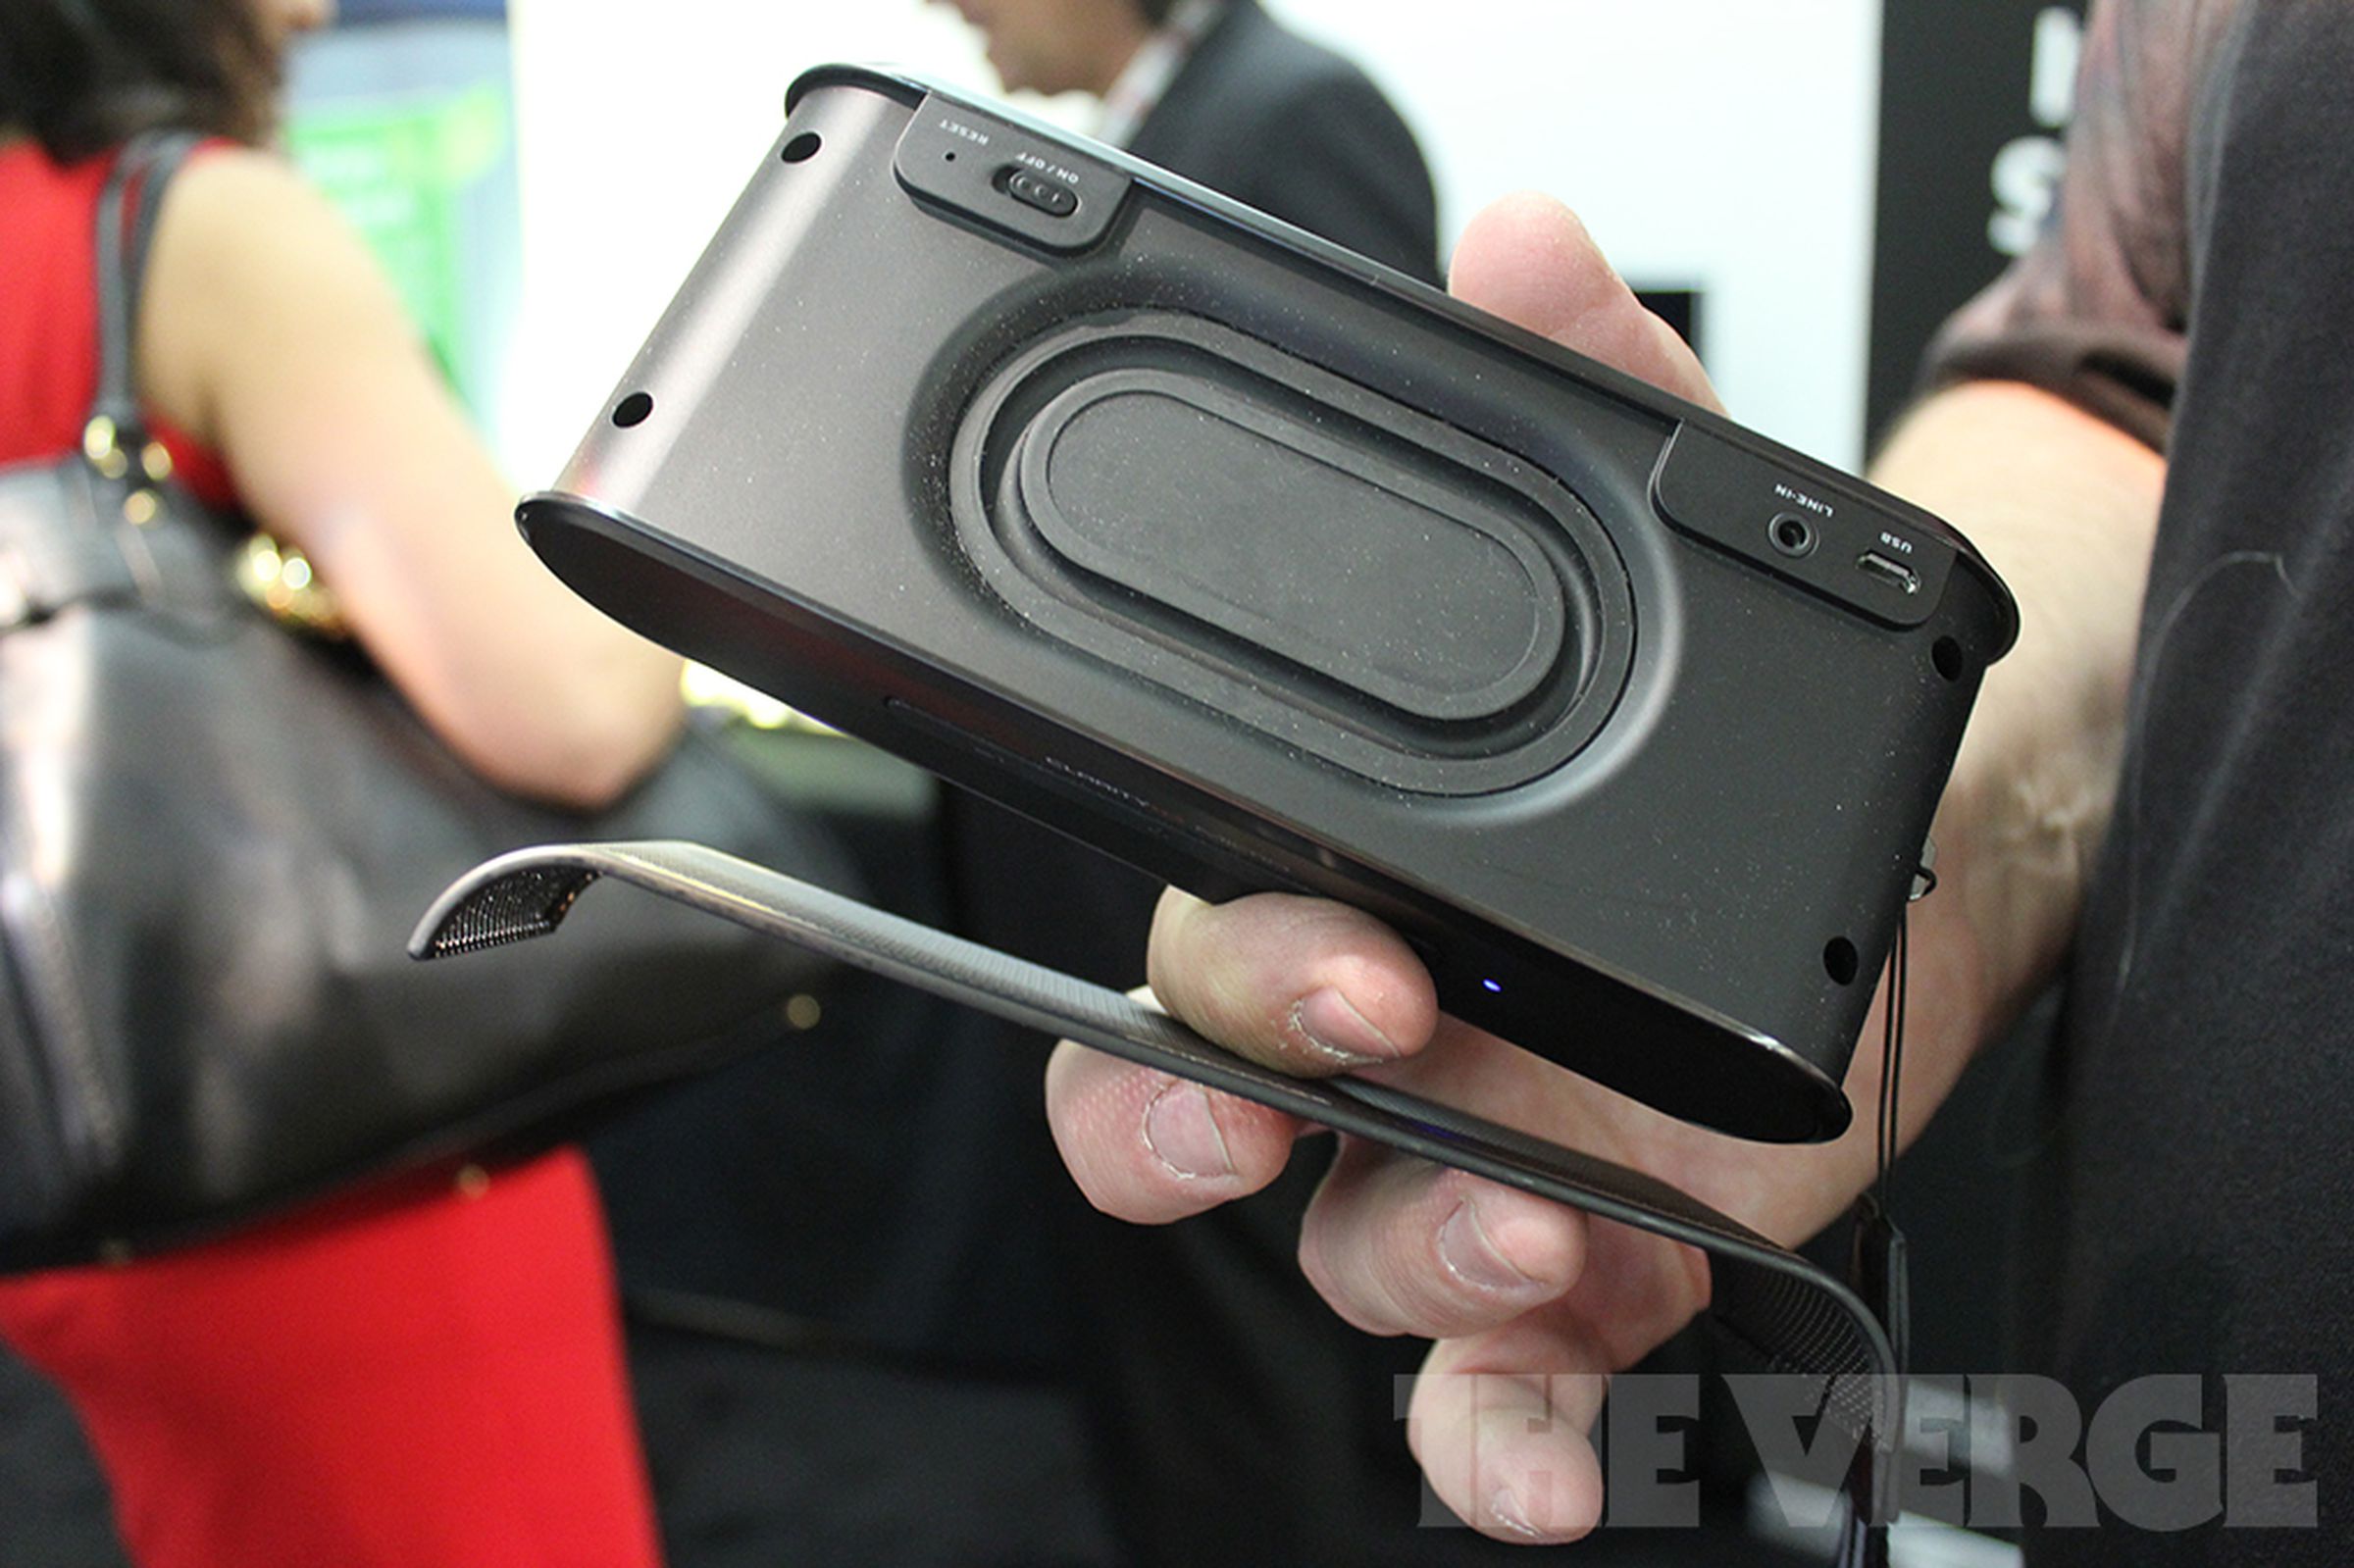 Monster Clarity HD Micro hands-on photos